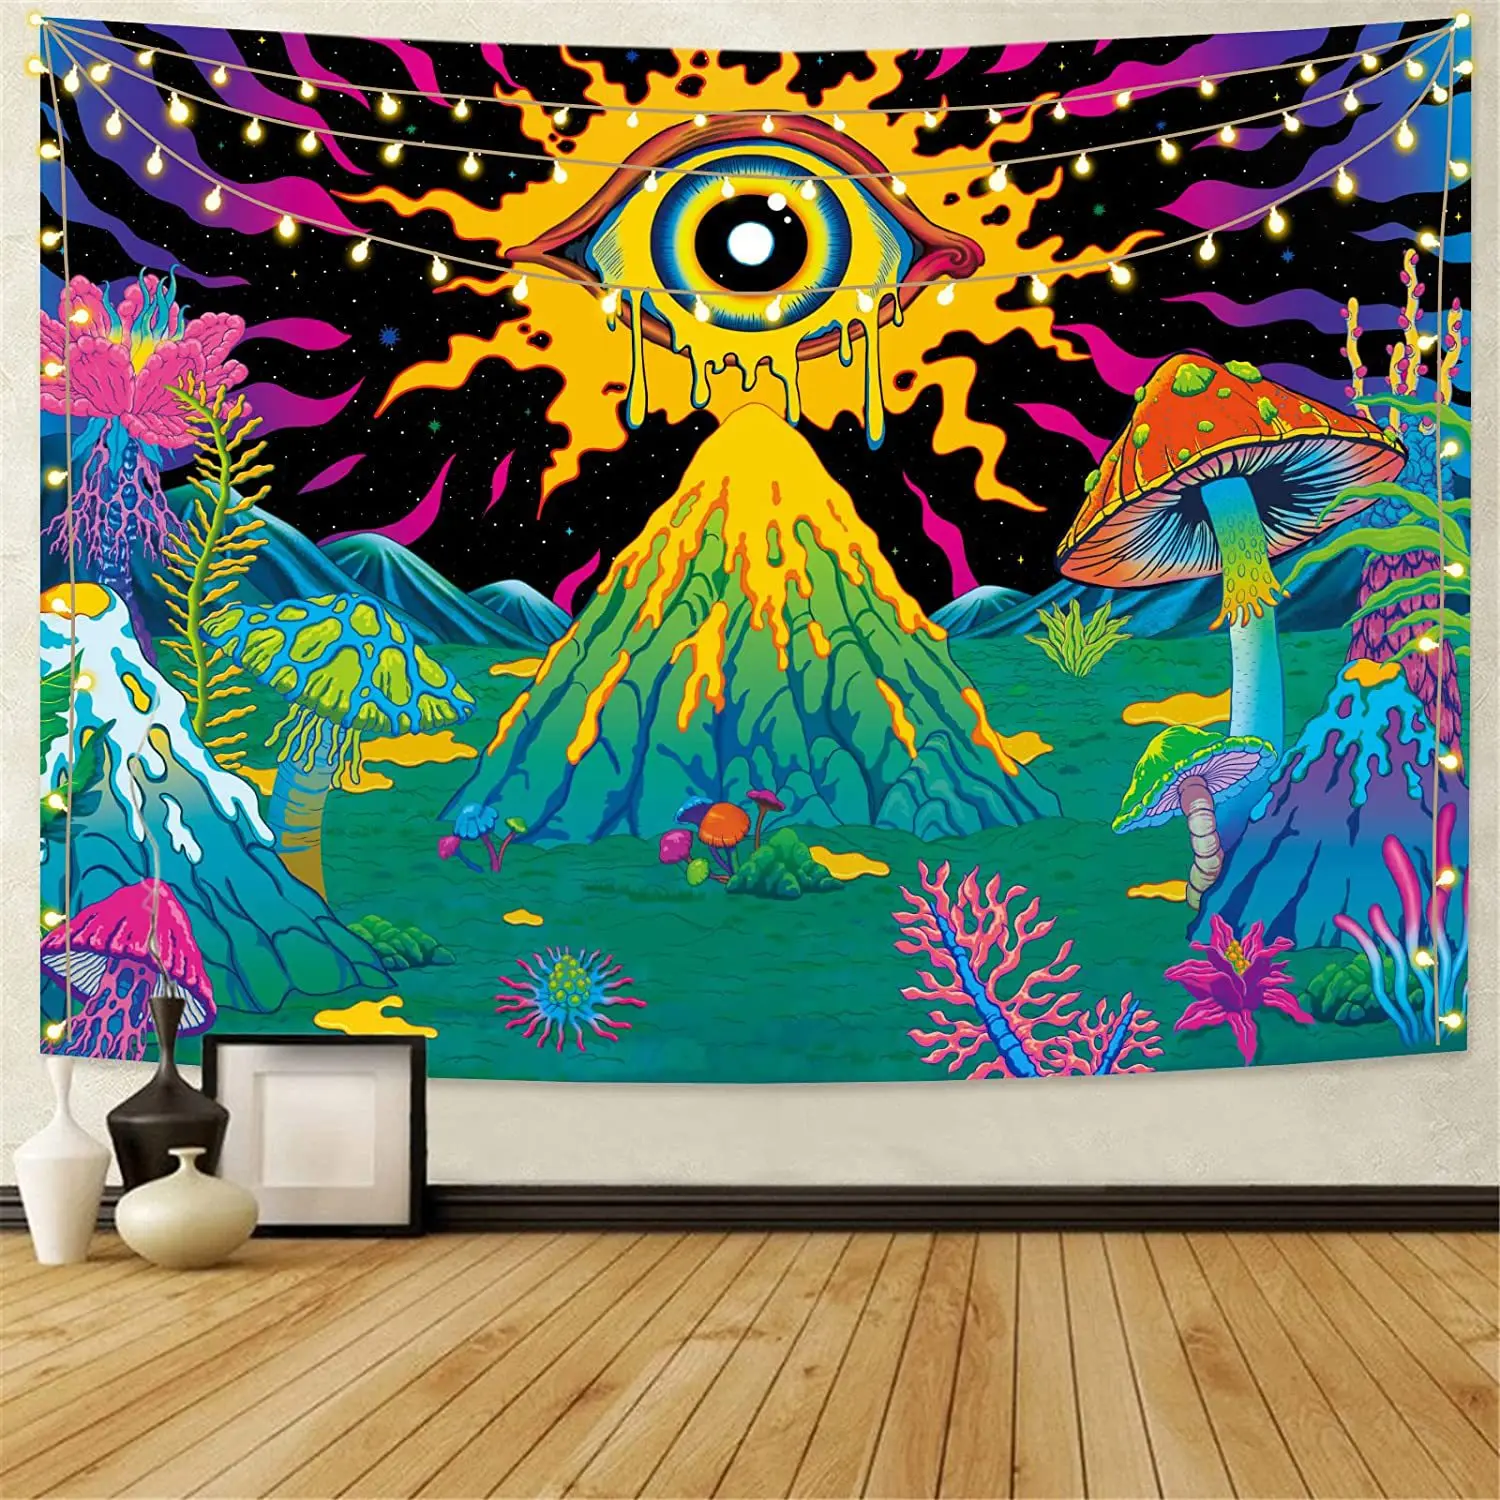 

Tapestry Hot Sale Collection Series Background Cloth Mandala Mushroom Butterfly Dormitory Wall Decoration Cloth Room Tapestries